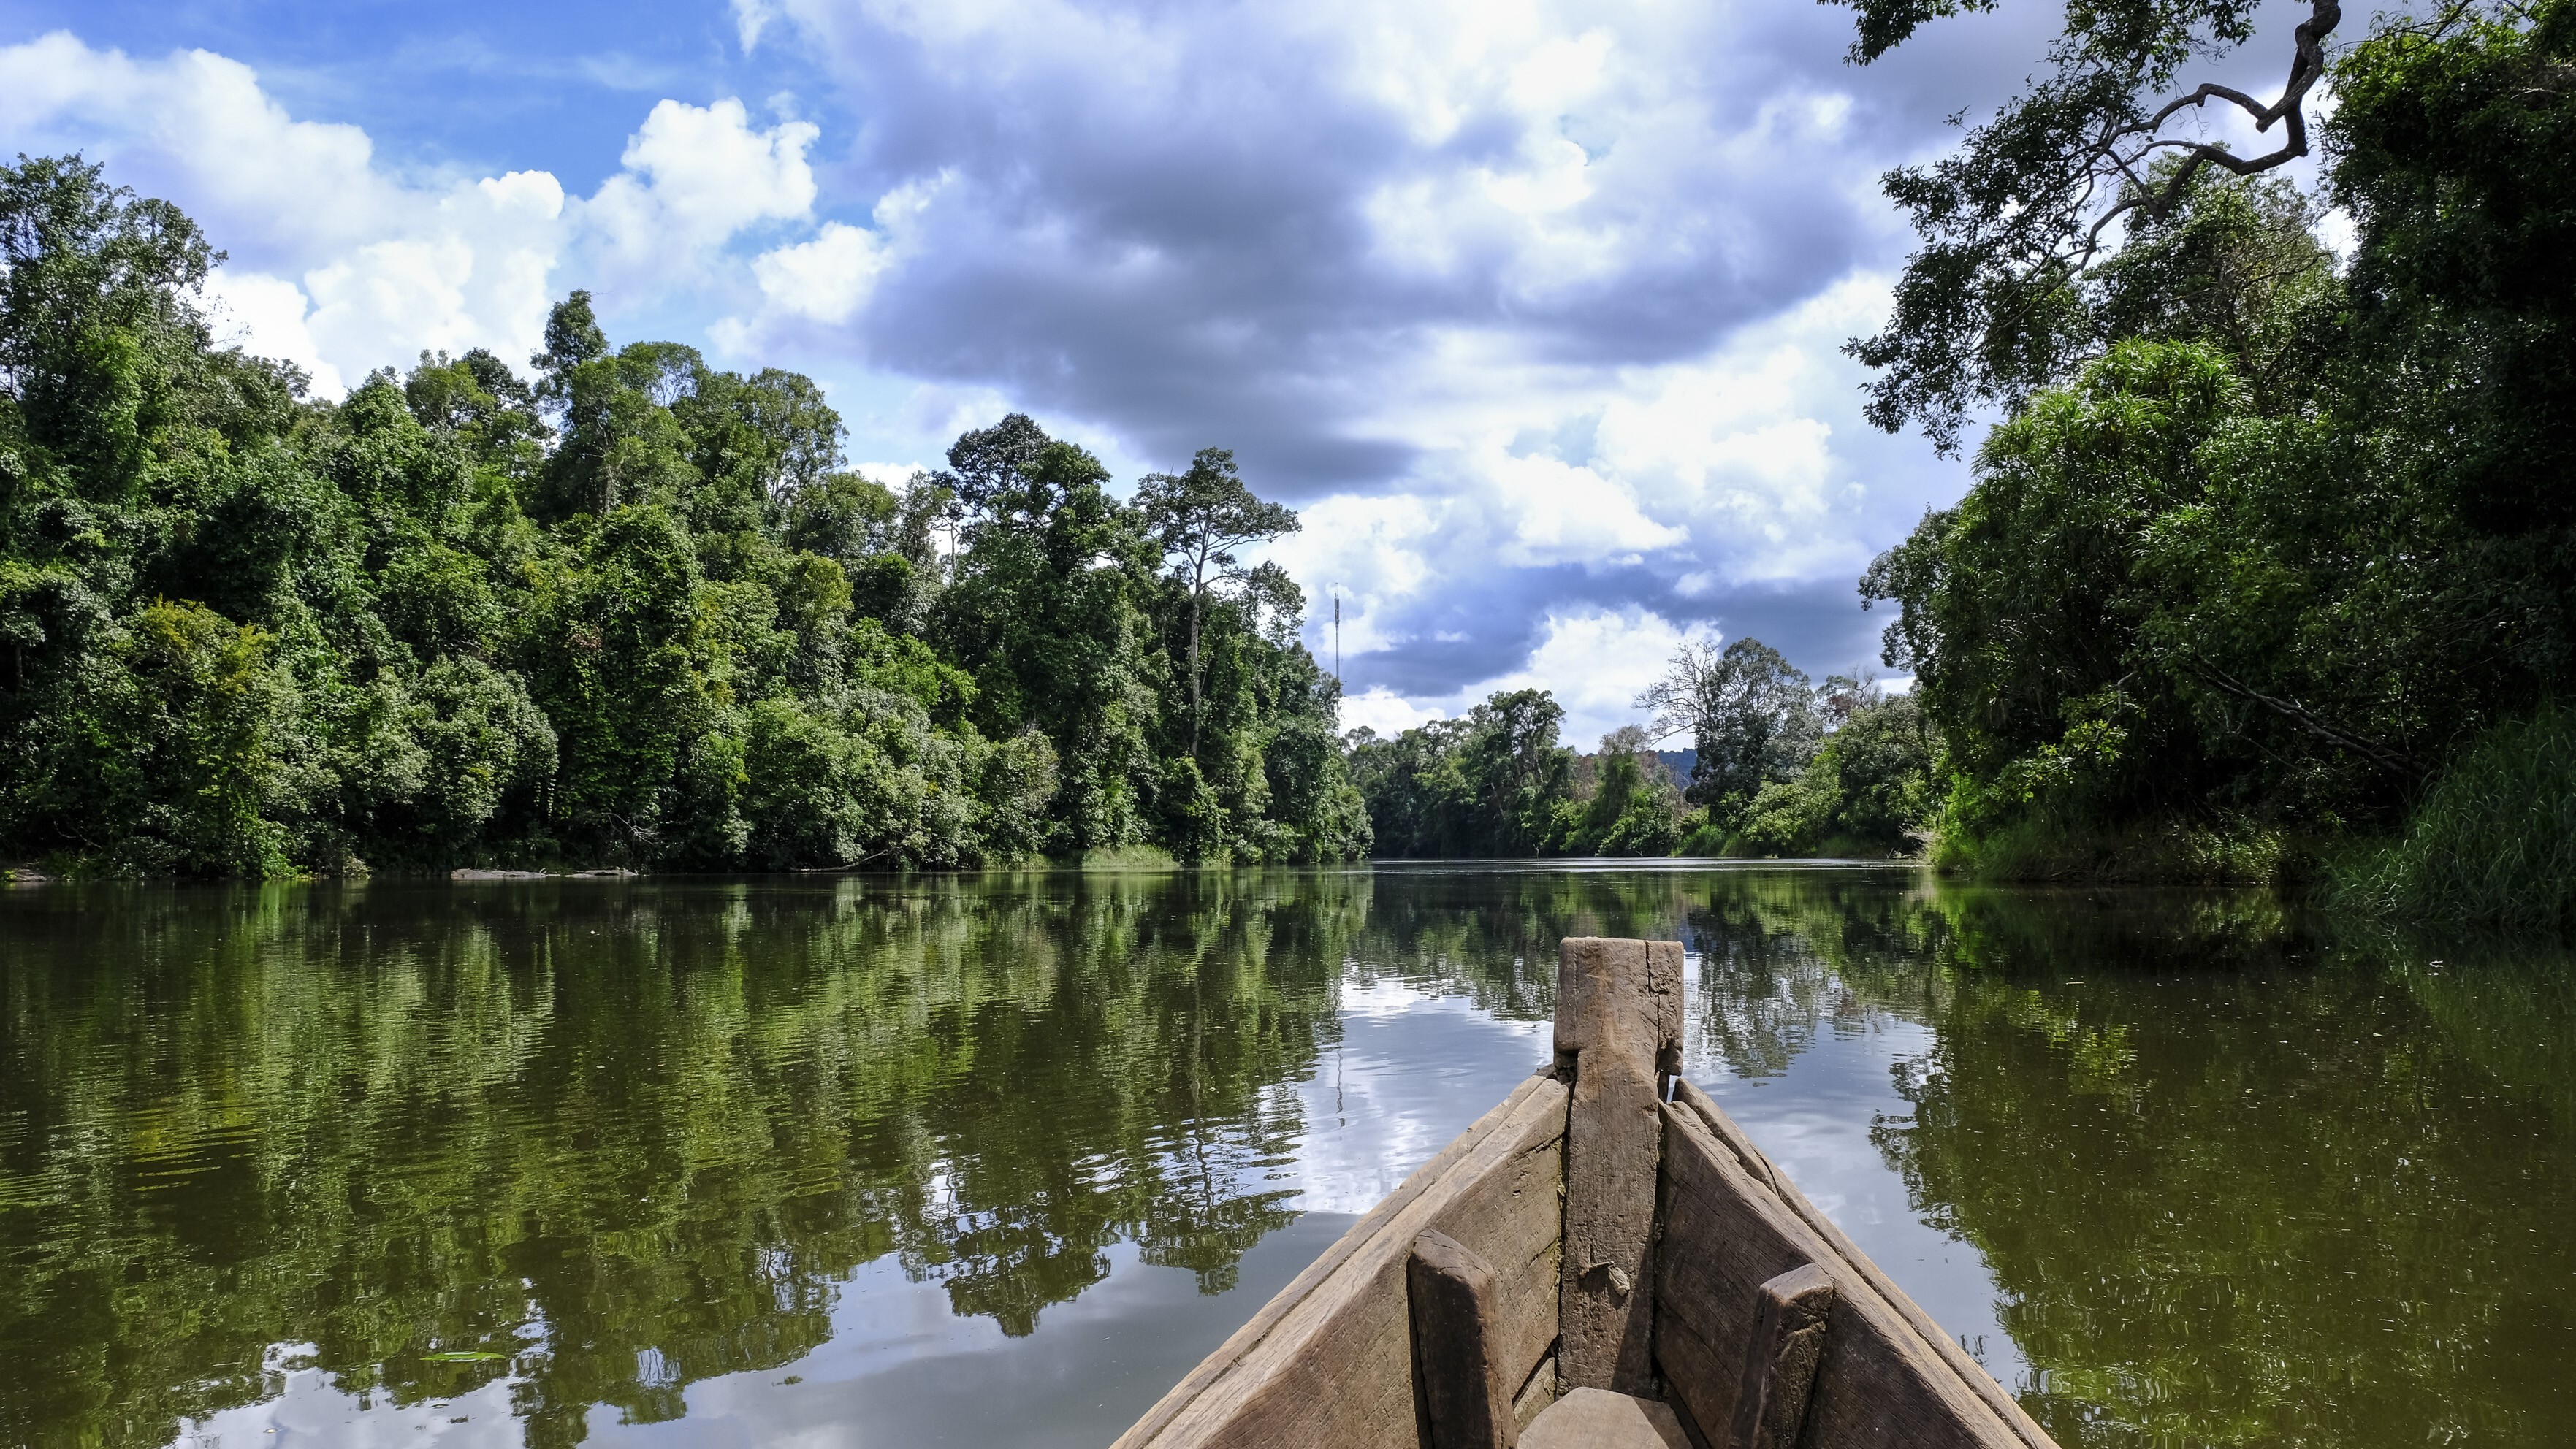 The Areng River, one of the last homes of elusive Siamese crocodiles, in the Areng Valley in Koh Kong province, Cambodia. Once a target site for a hydroelectric dam, the valley is now a hotspot for eco-tourism. Photo: Peter Ford